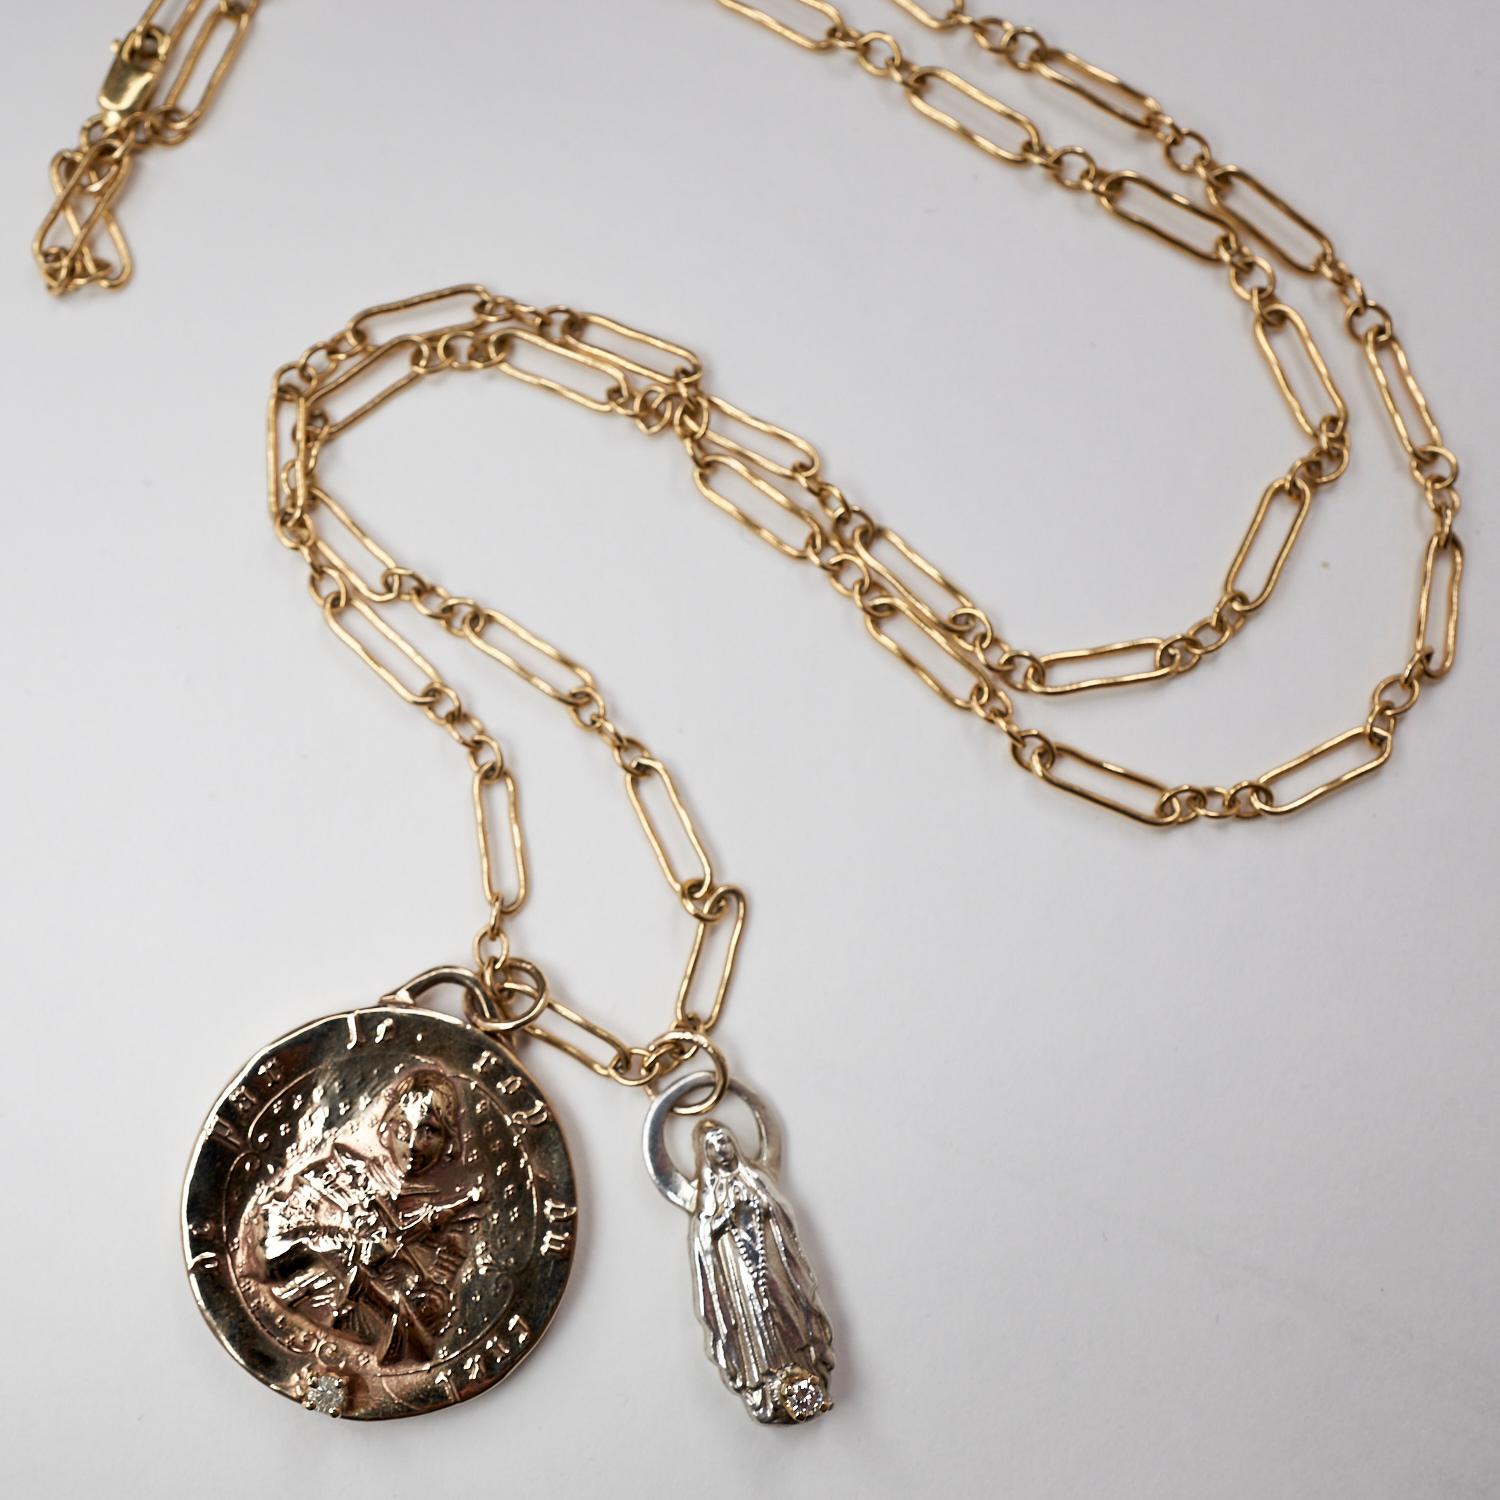 Victorian White Diamond Chunky Chain Necklace Medal Coin Pendant Joan of Arc J Dauphin For Sale